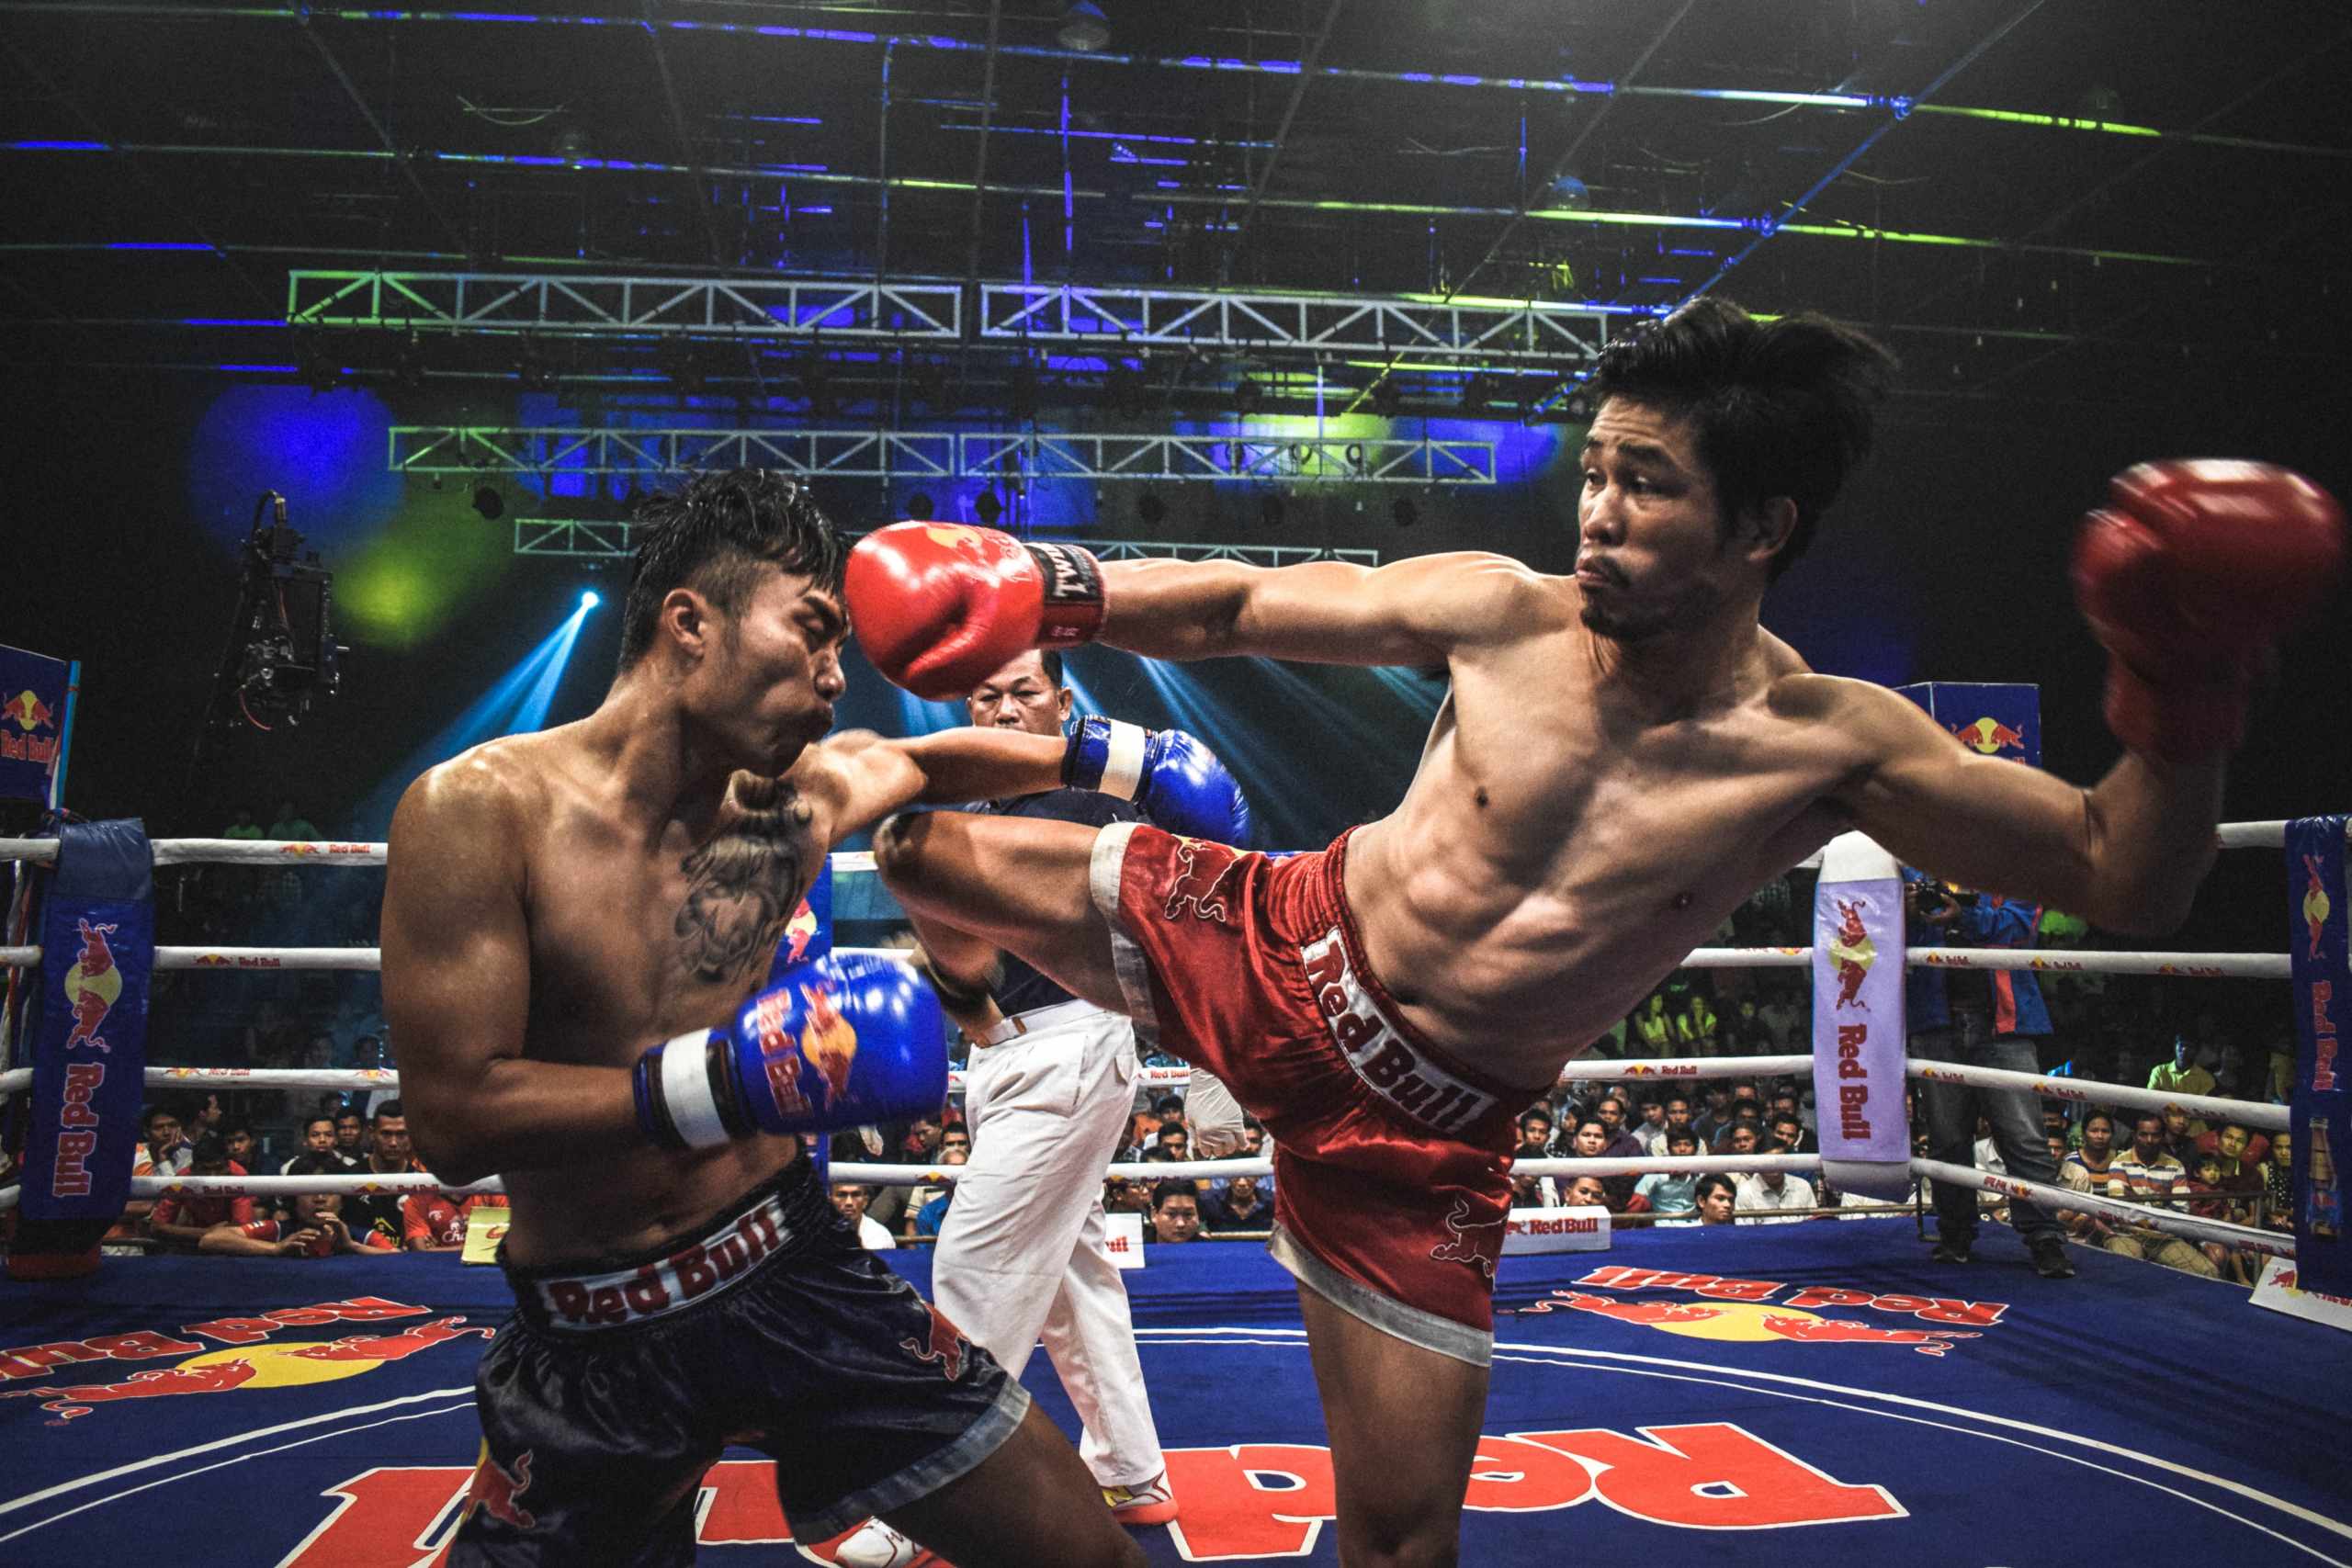 SuWit Muay Thai in Thailand is the New for Good Health